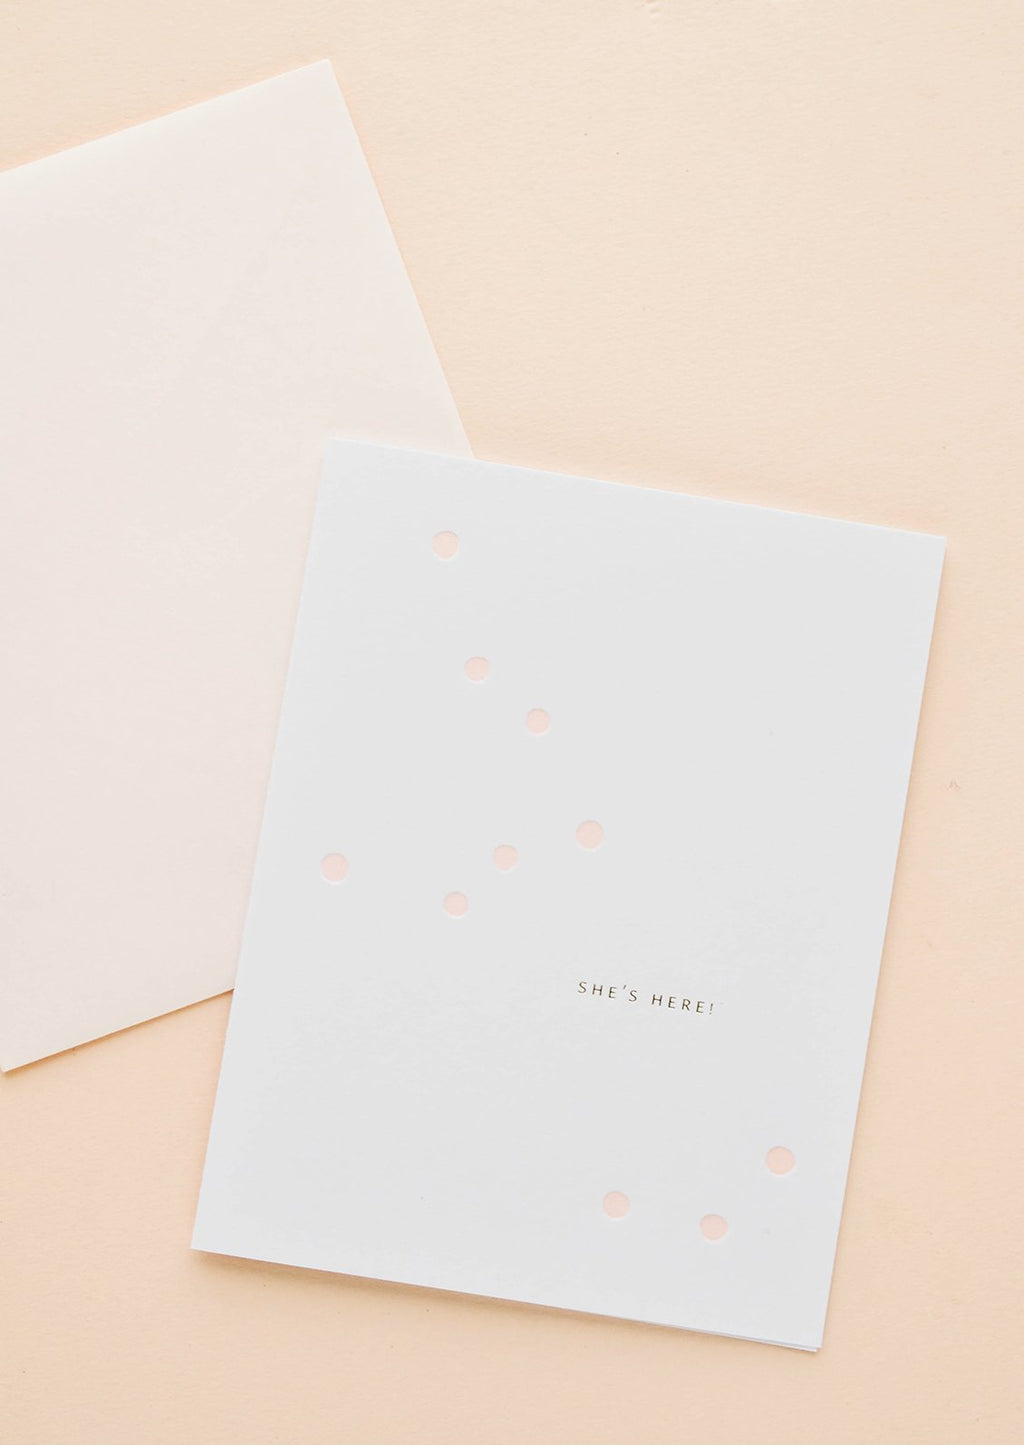 2: White greeting card with scattered light pink dot and gold text reading "She's here!", paired with pale pink envelope